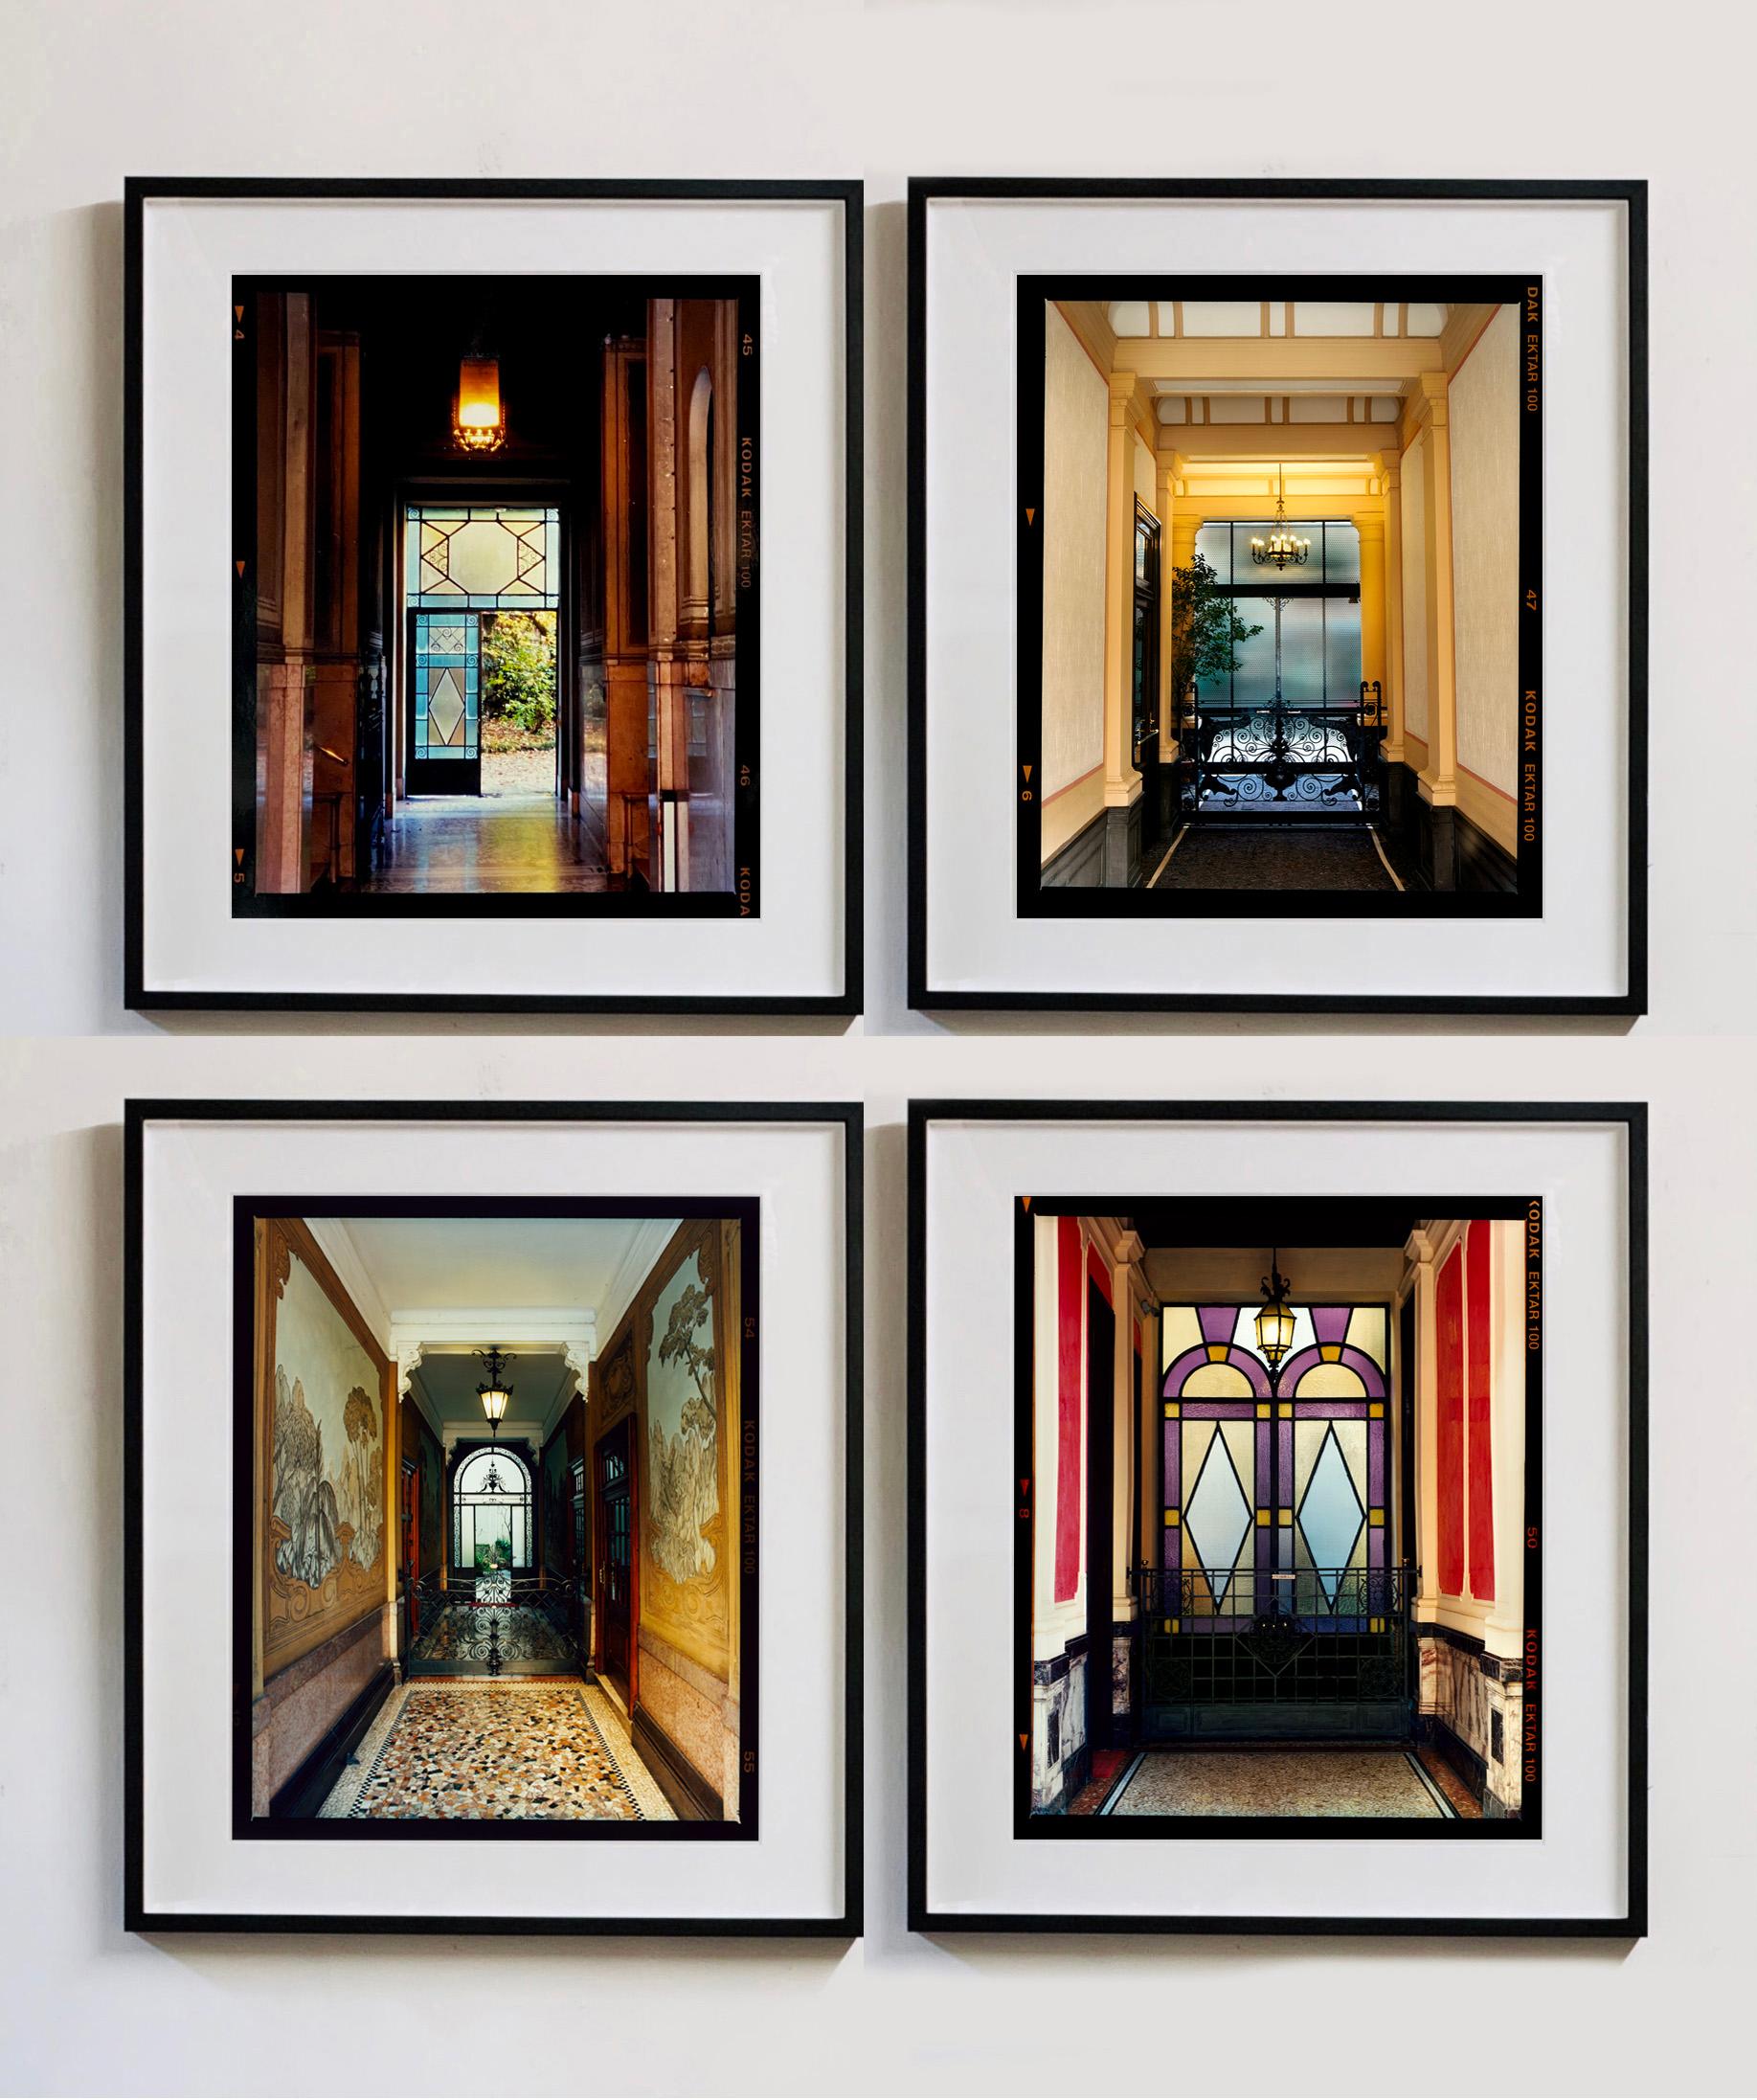 Foyers, Milan - Set of Four Framed Color Photographs - Contemporary Print by Richard Heeps